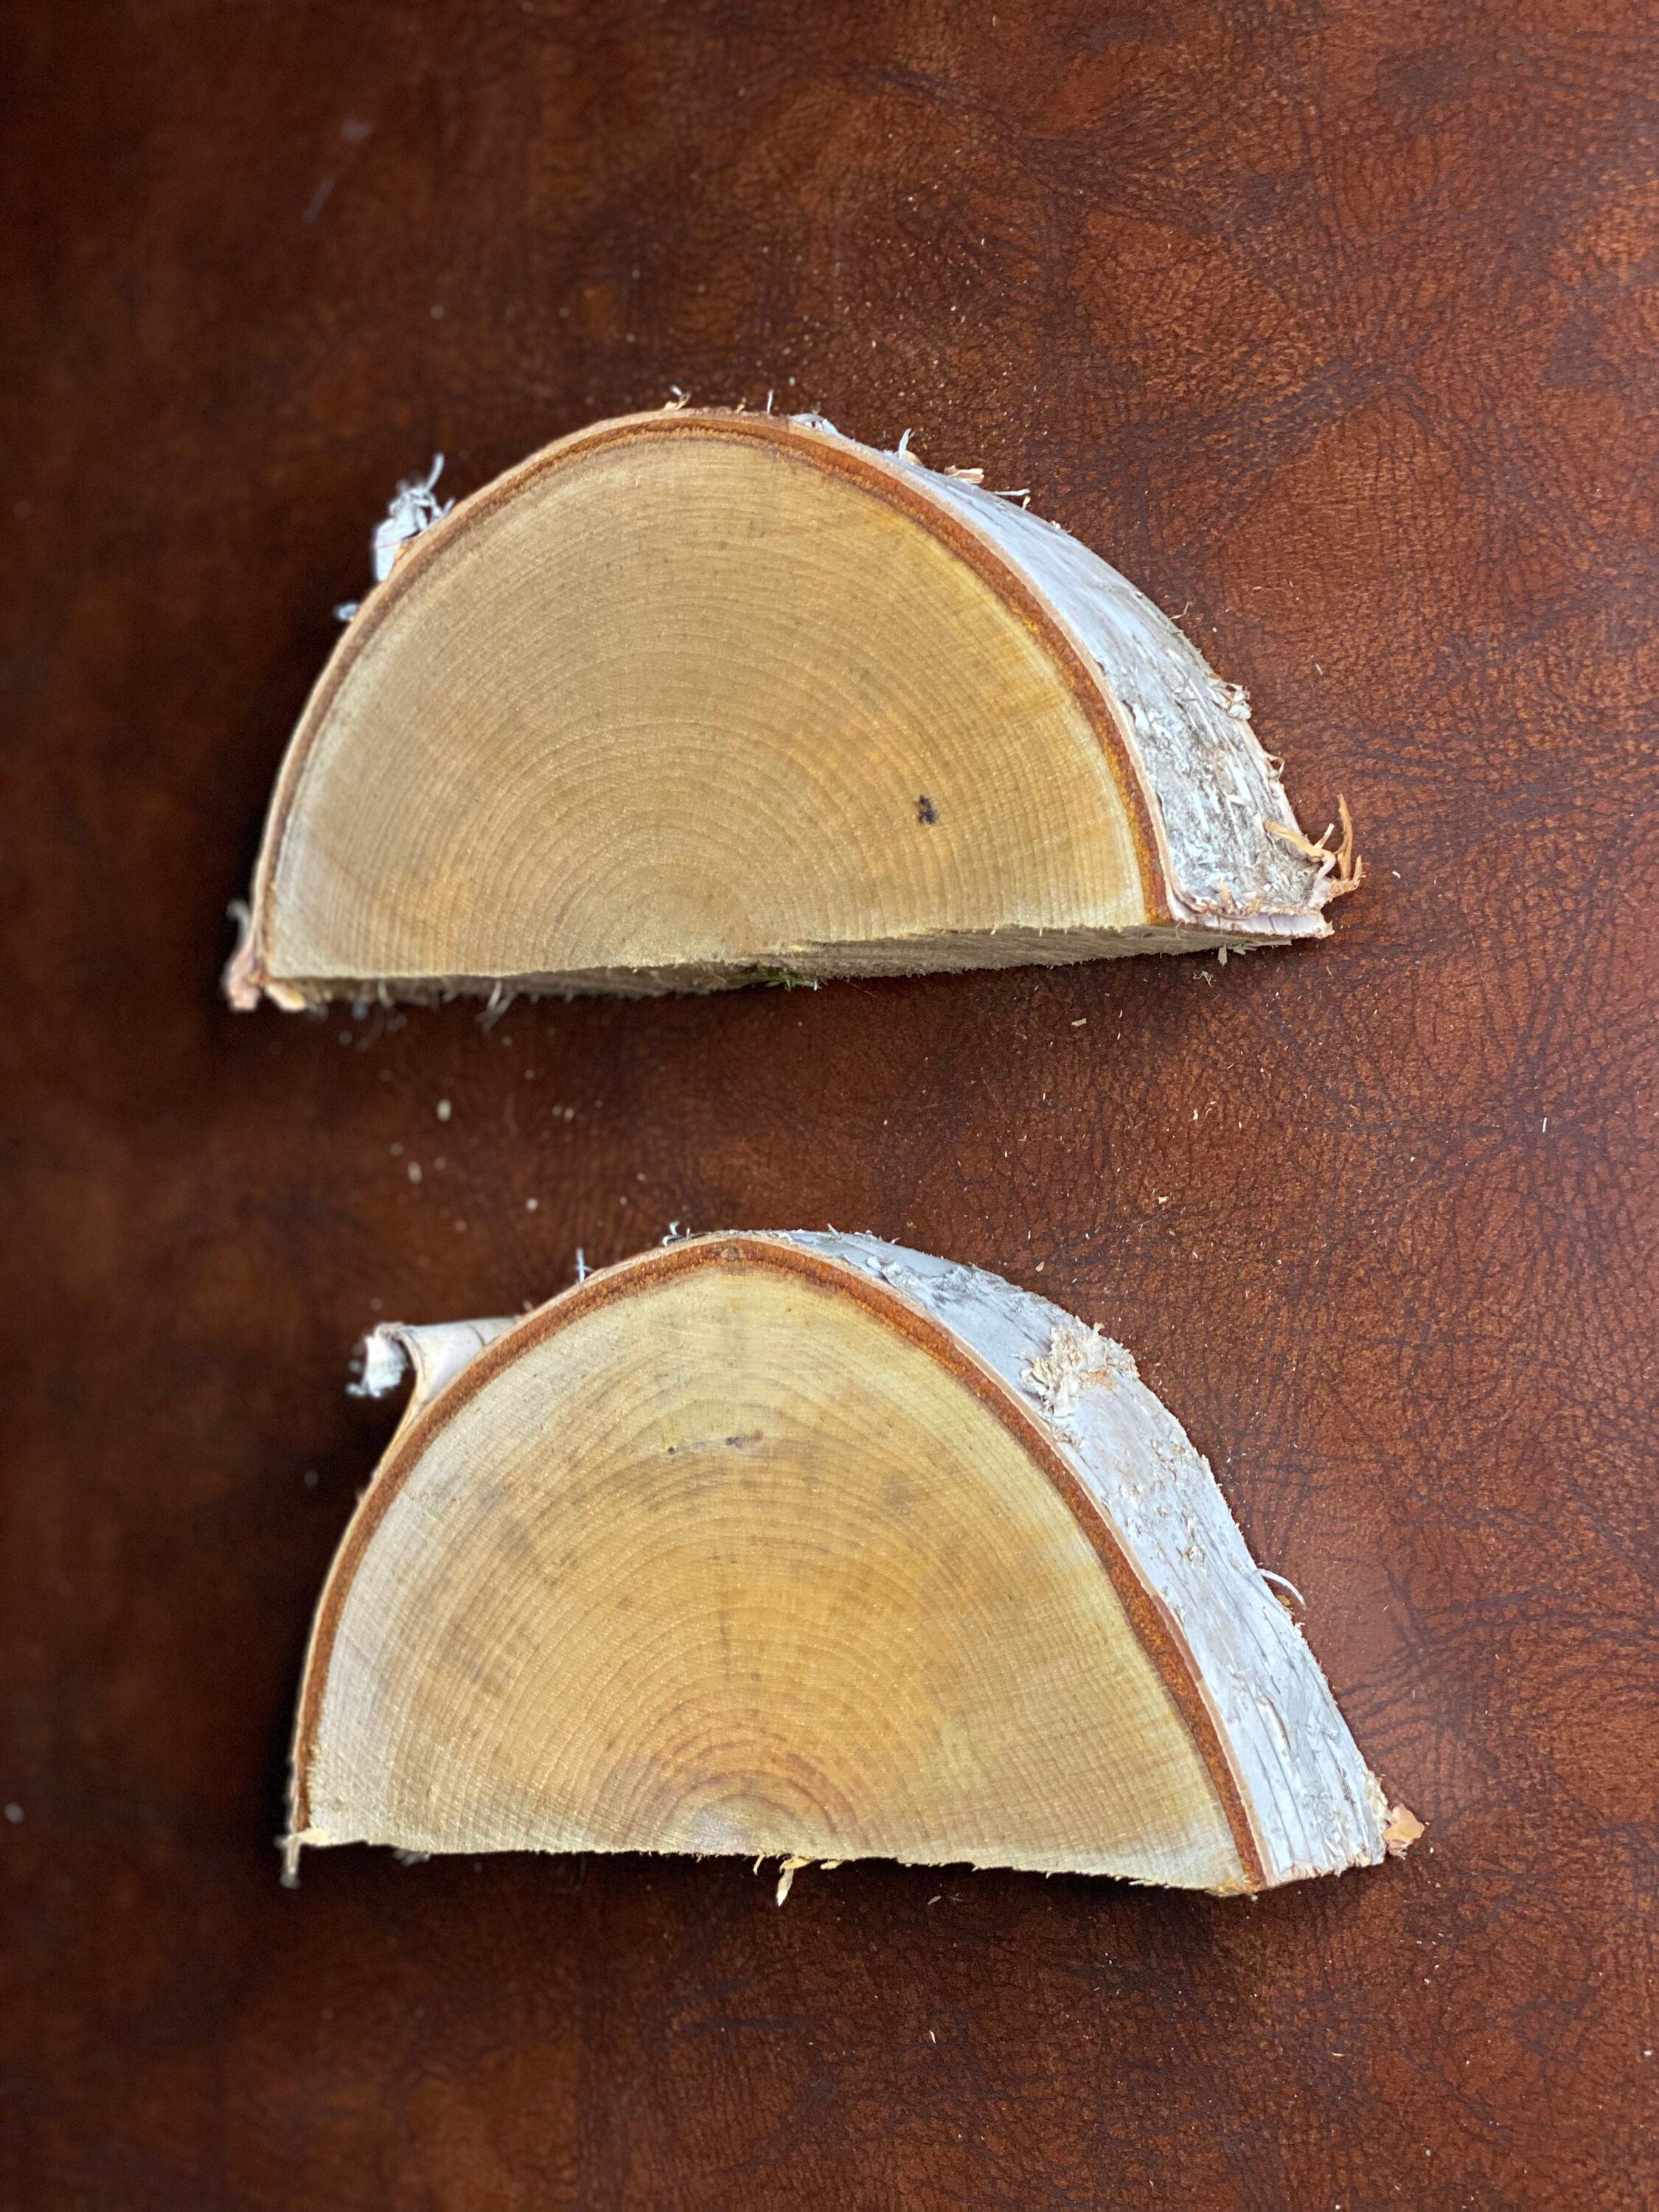 White Birch Half Slices, Approximately 7.5 Inches Long by 4 Inches Wide and 2 Inches Tall